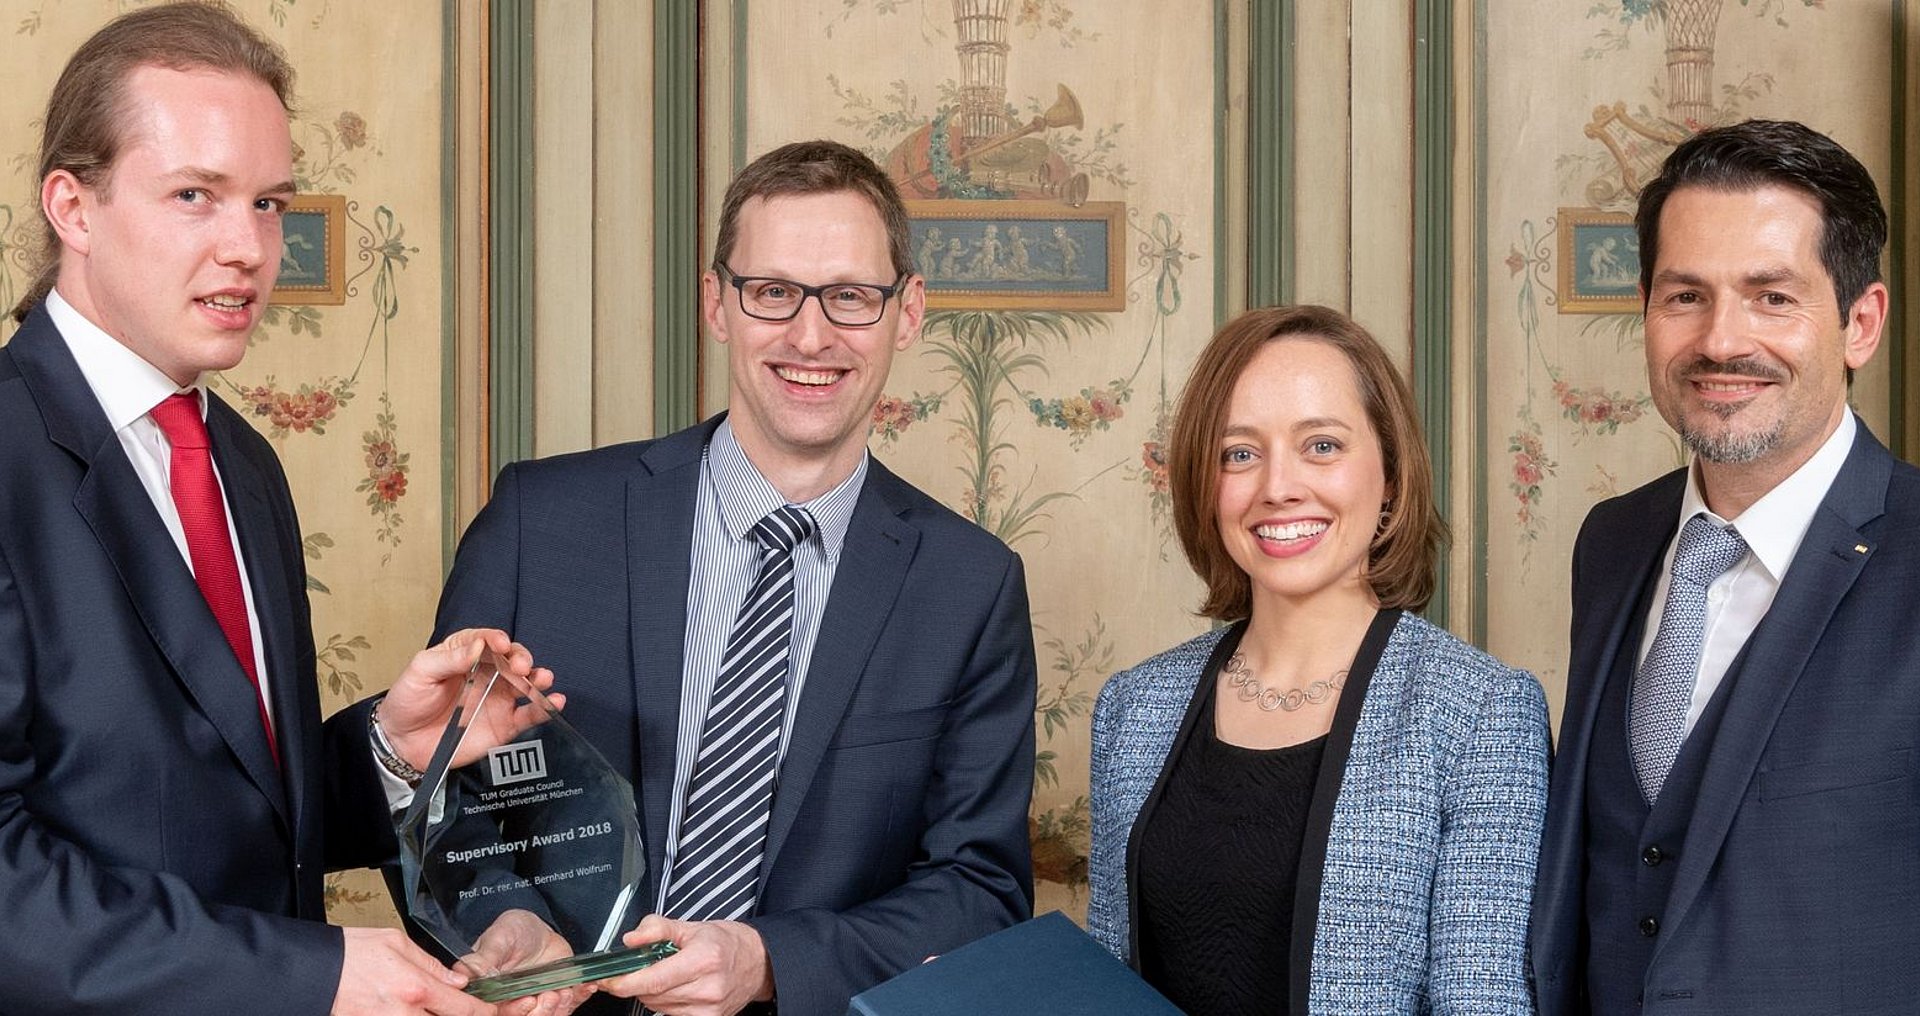 Sindre Haugland, Prof. Bernhard Wolfrum, Franziska Löhrer and Prof. Dr. Thomas F. Hoffmann (from left to right) at the presentation of the 2018 Supervisory Award.